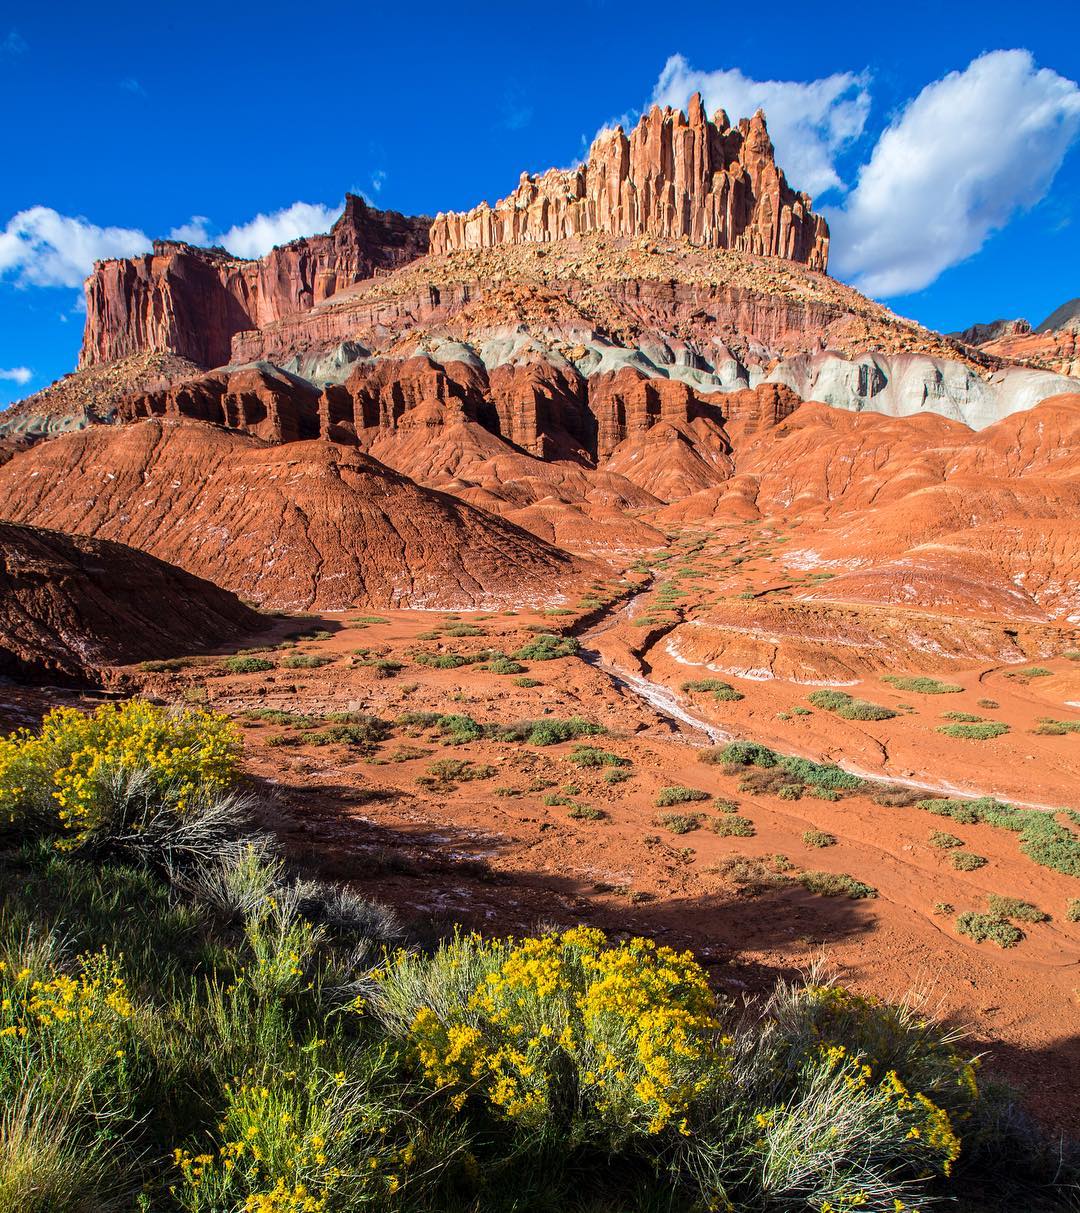 The Castle Rock Formation at Capitol Reef National Park. Photo by Instagram user @capitolreefnps